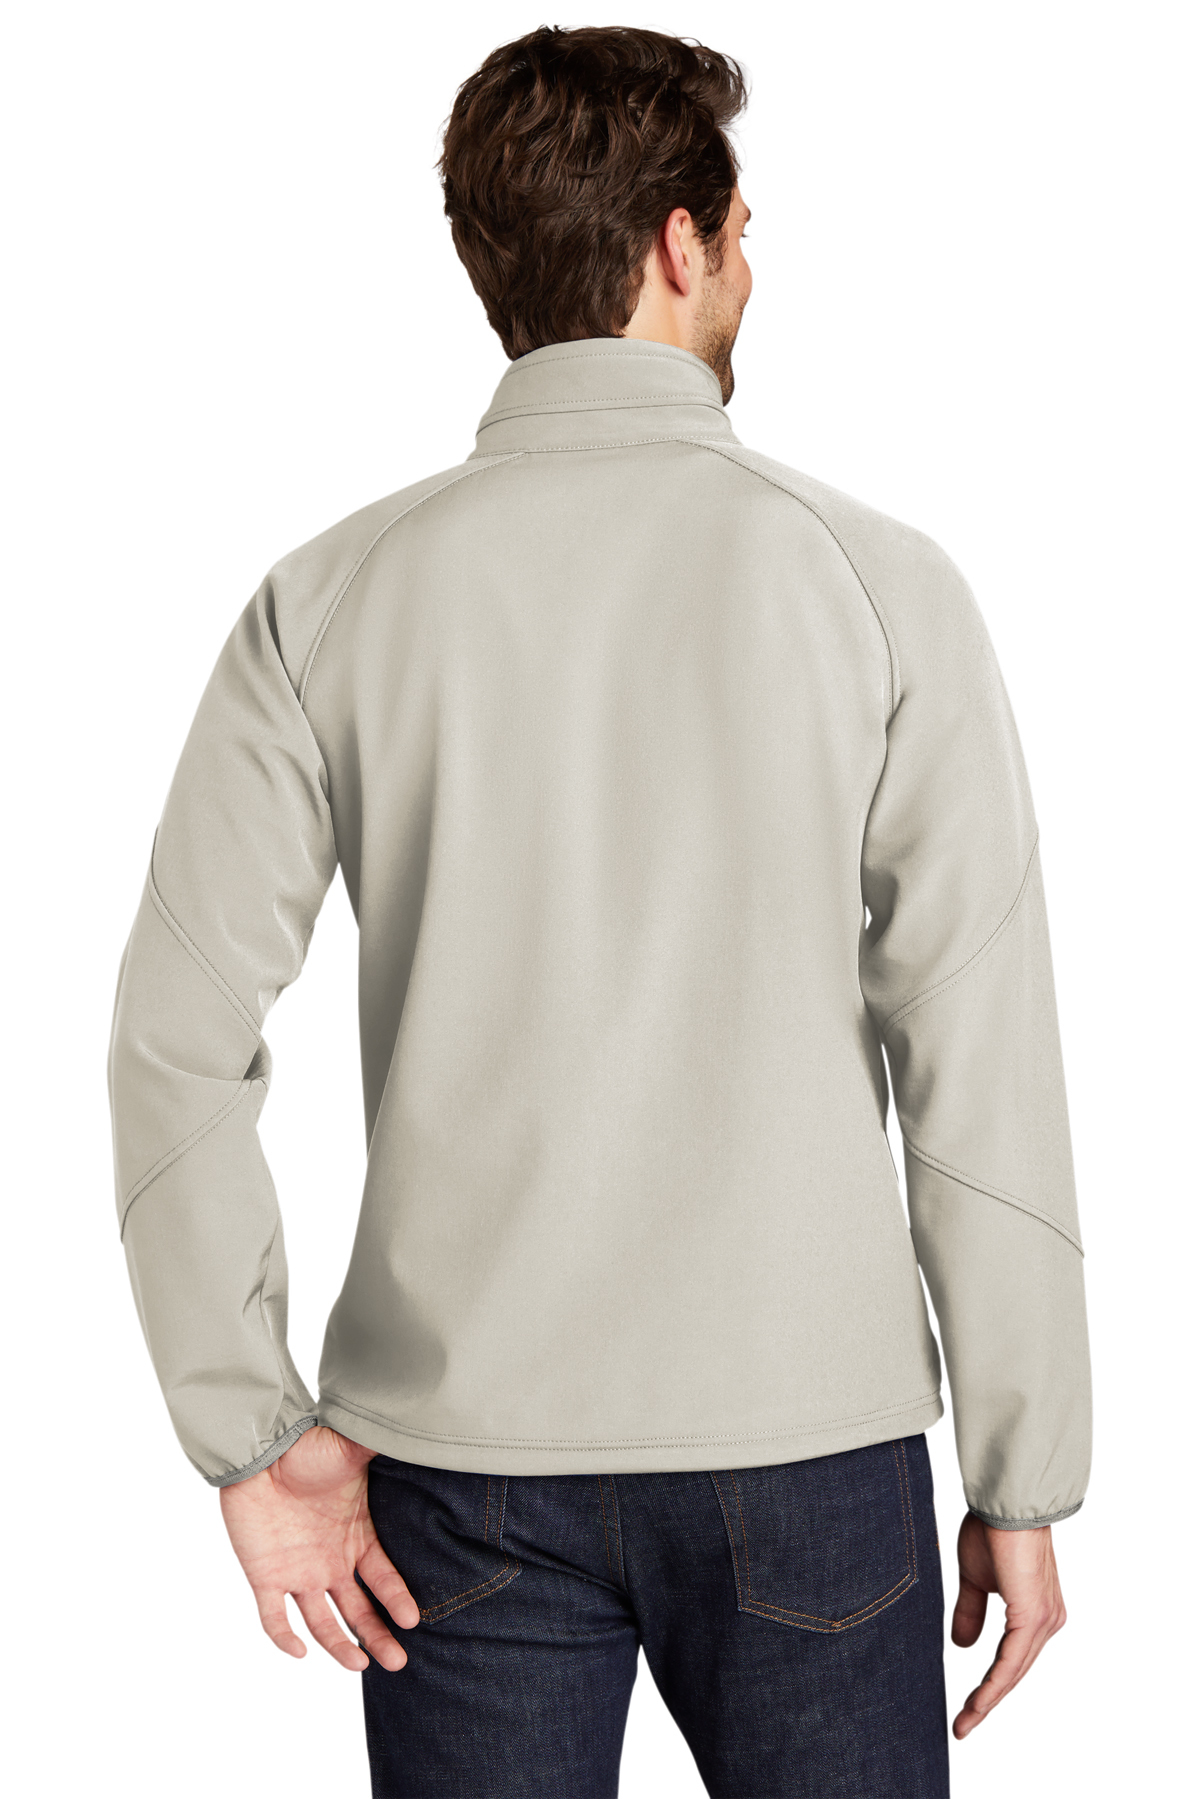 Port Authority Textured Soft Shell Jacket | Product | SanMar